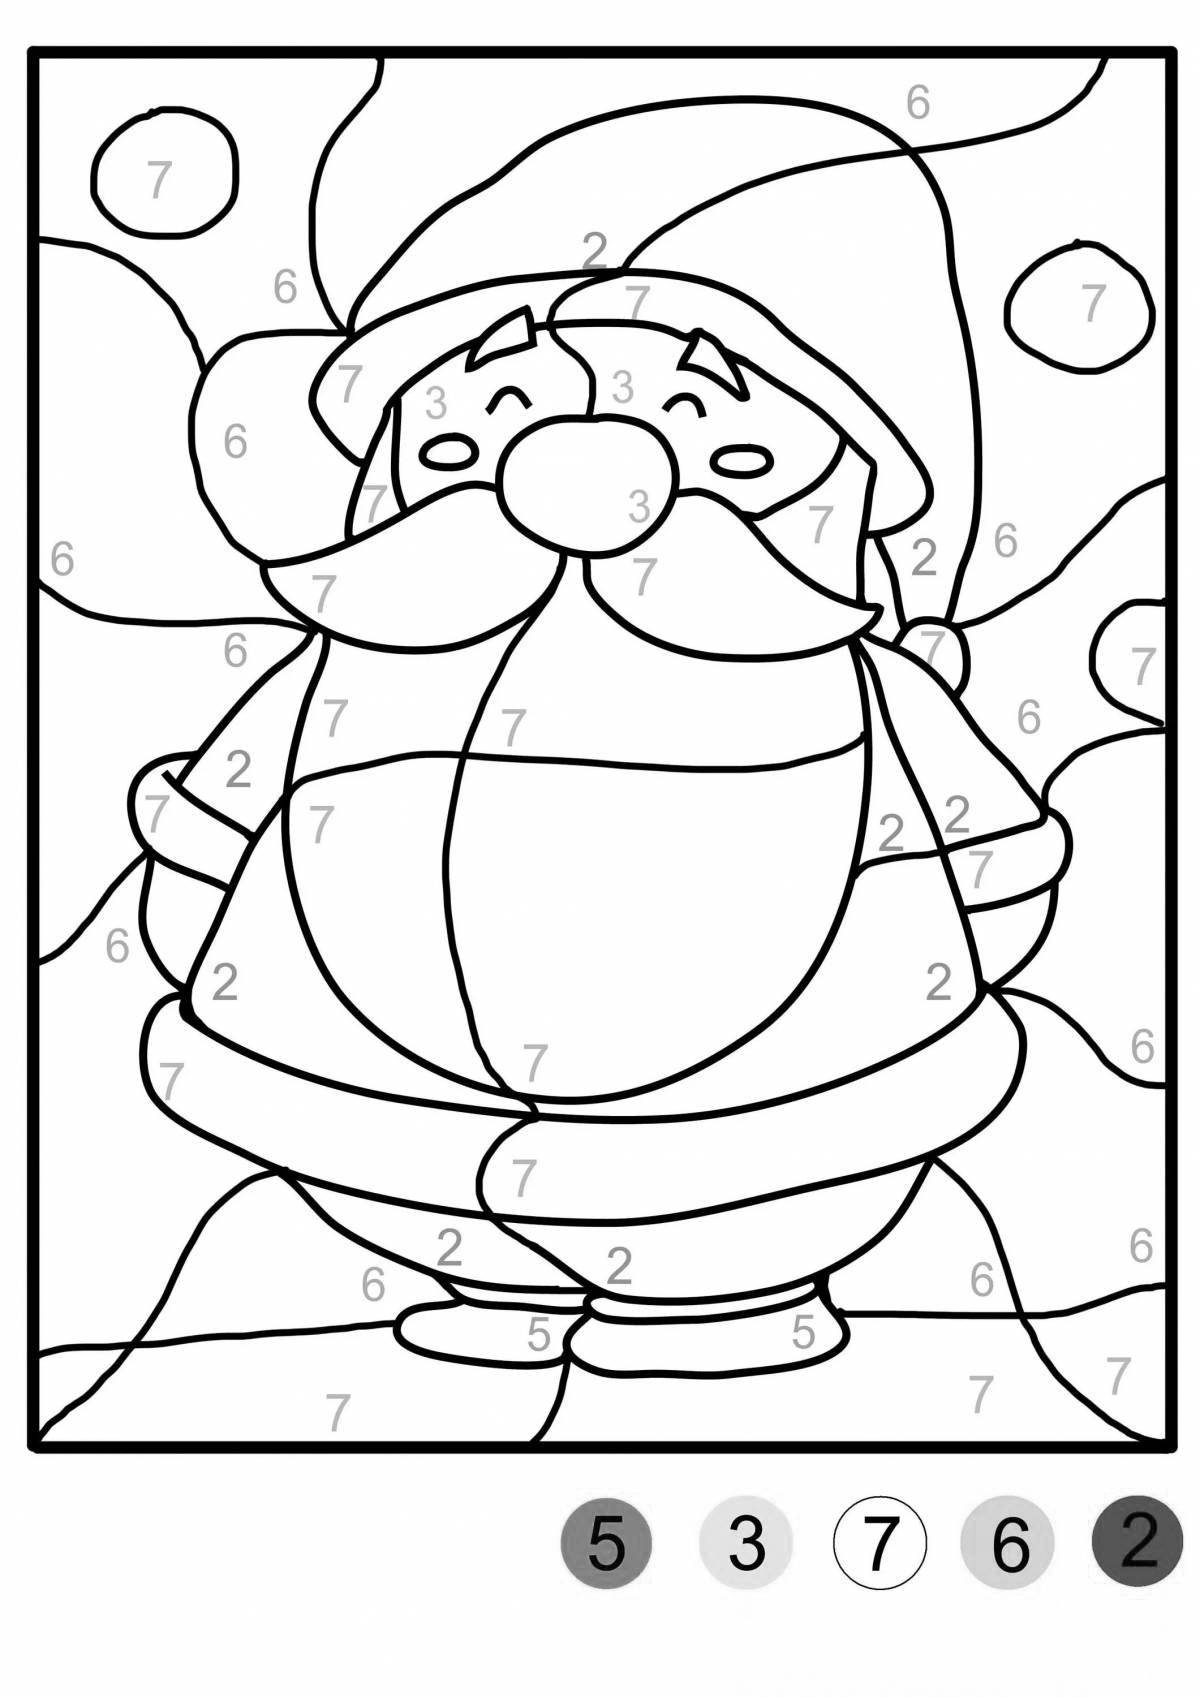 Snowman wild coloring by numbers